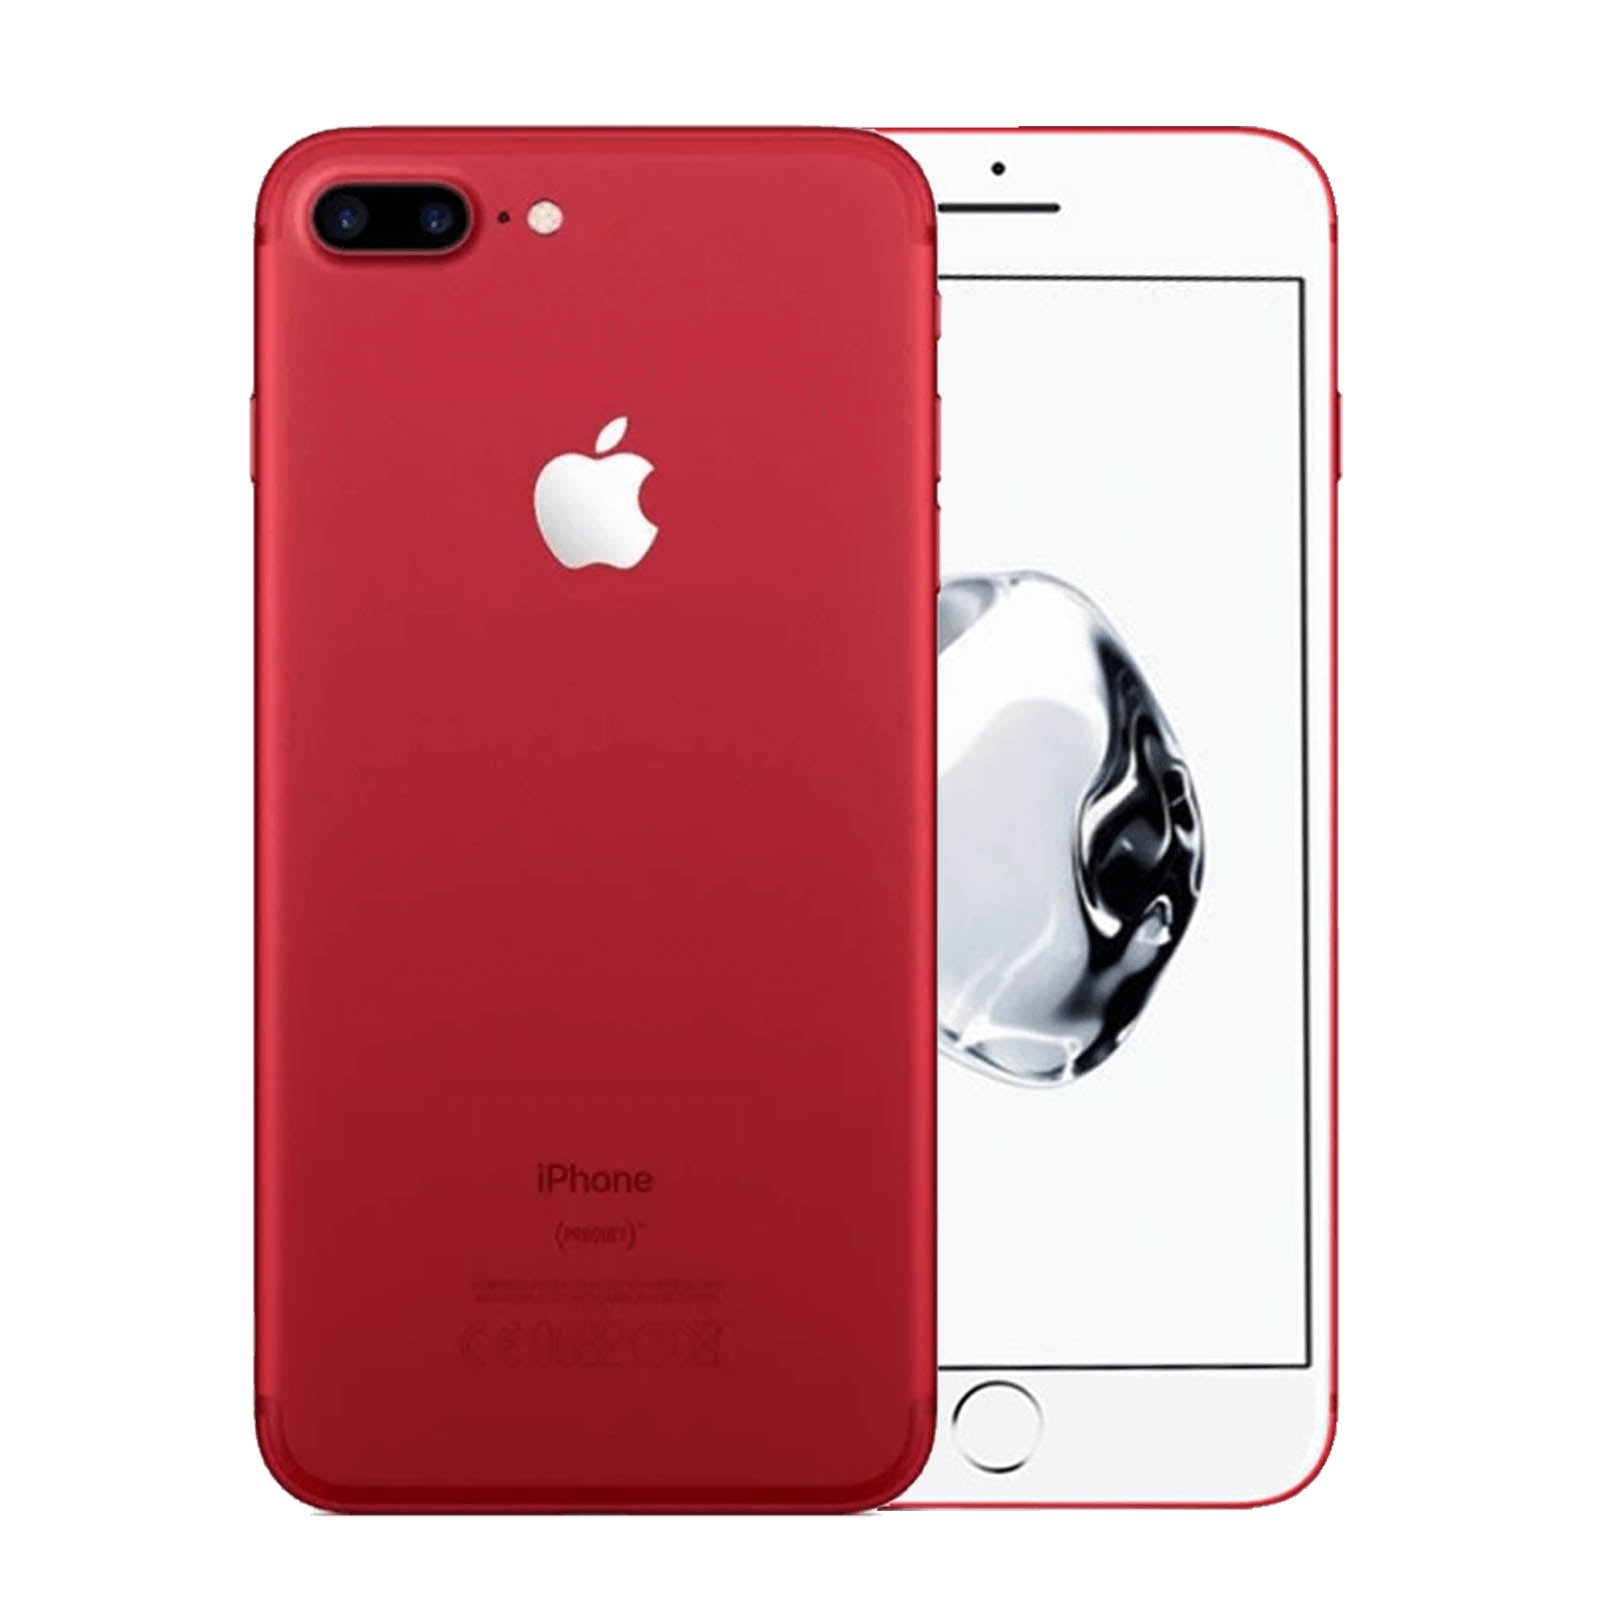 Apple iPhone 7 Plus 256GB Product Product Red Gut - Ohne Vertrag